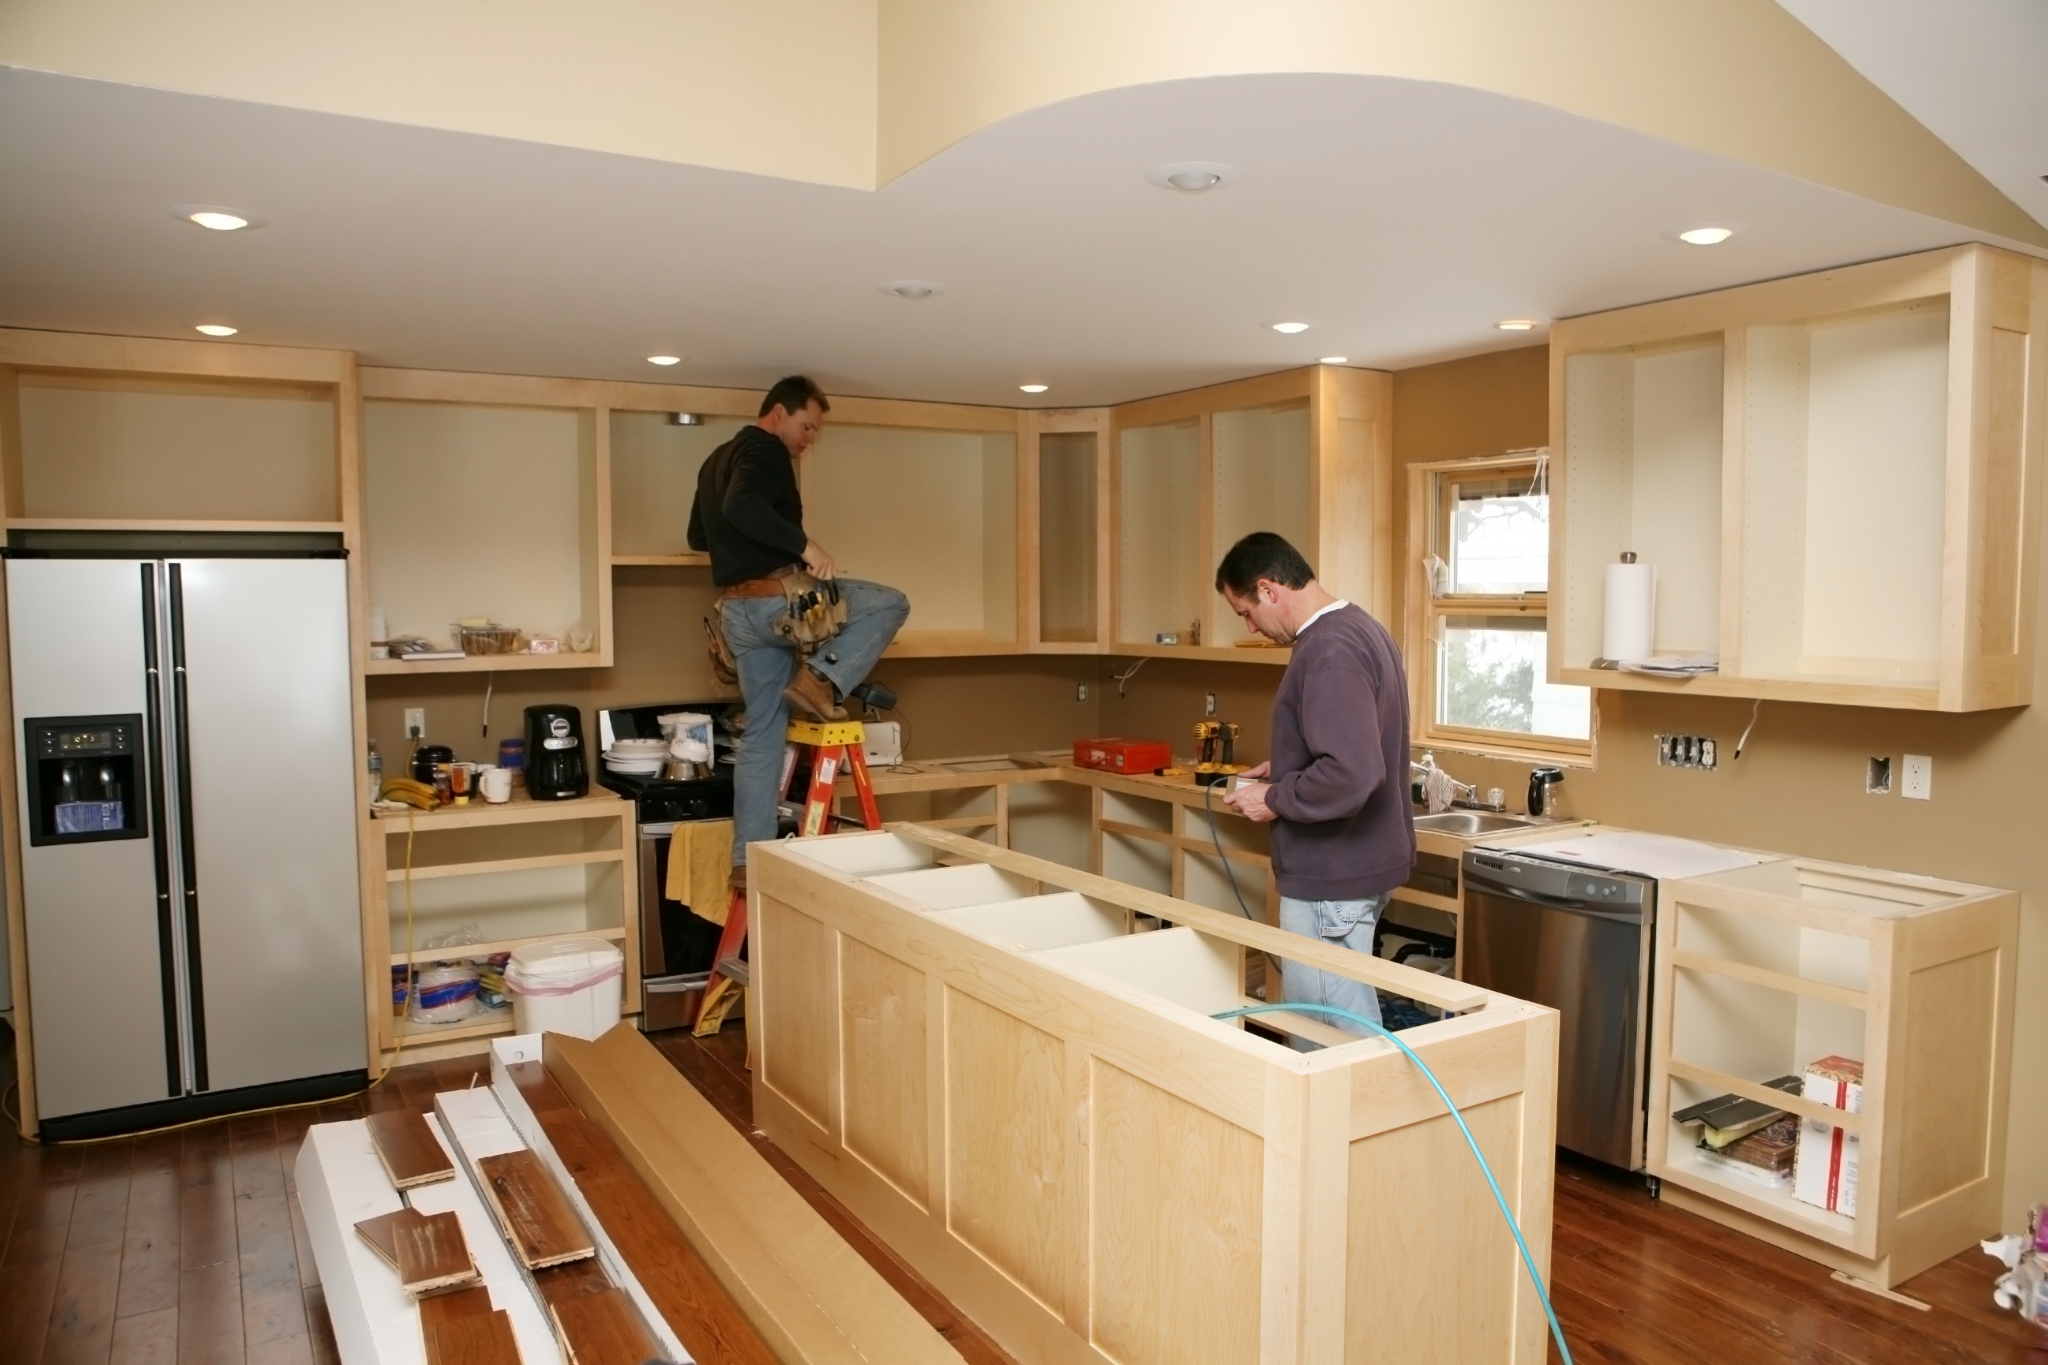 Refacing cabinets is also a common home improvement project that doesn't require a permit.